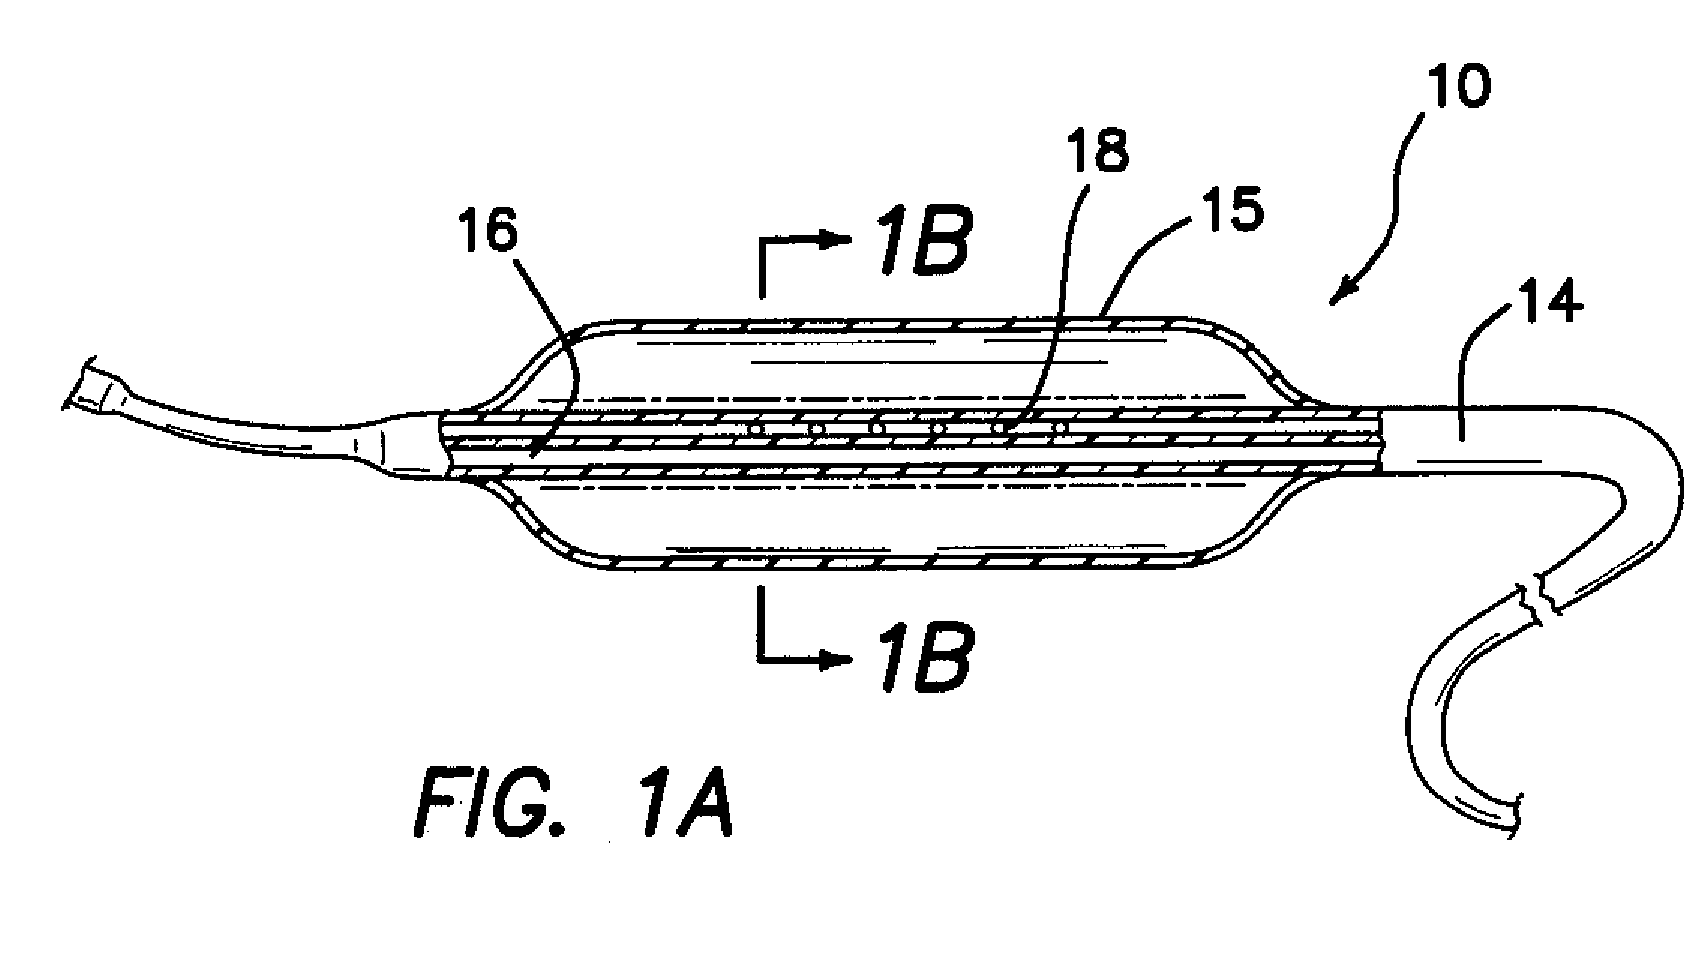 Dilation catheter assembly with bipolar cutting element